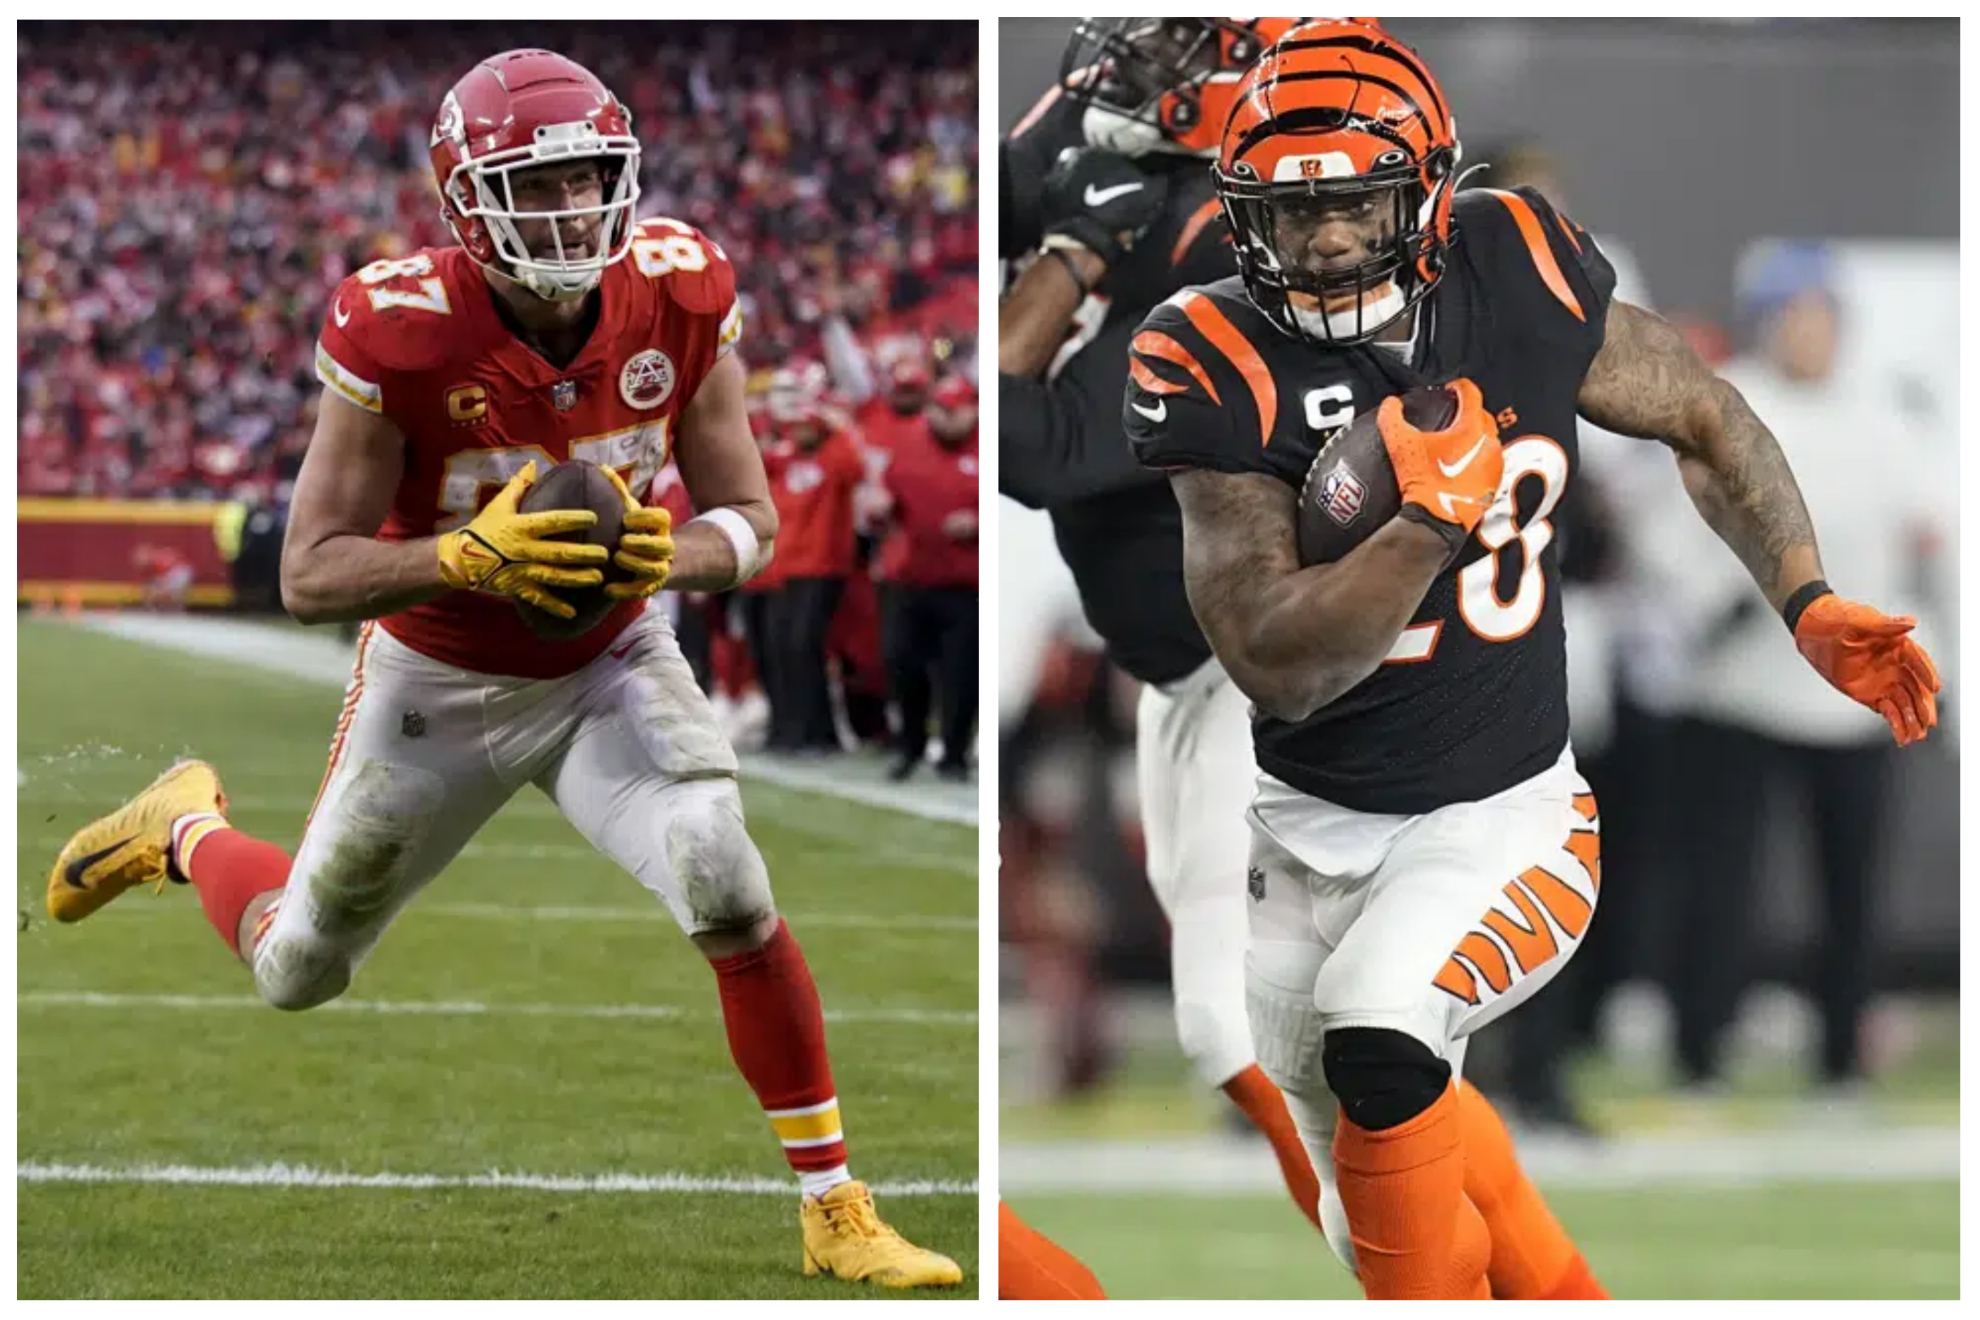 The Chiefs will host the Bengals in the AFC Championship game.